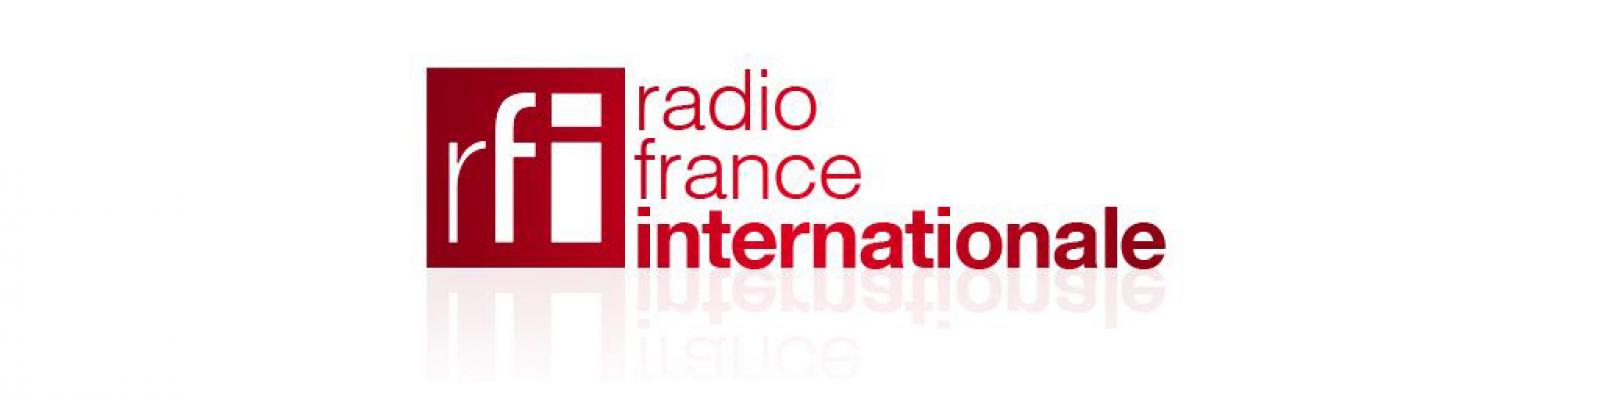 Radio France Interviews EWI's Firestein on Taiwan Arms Sales Report